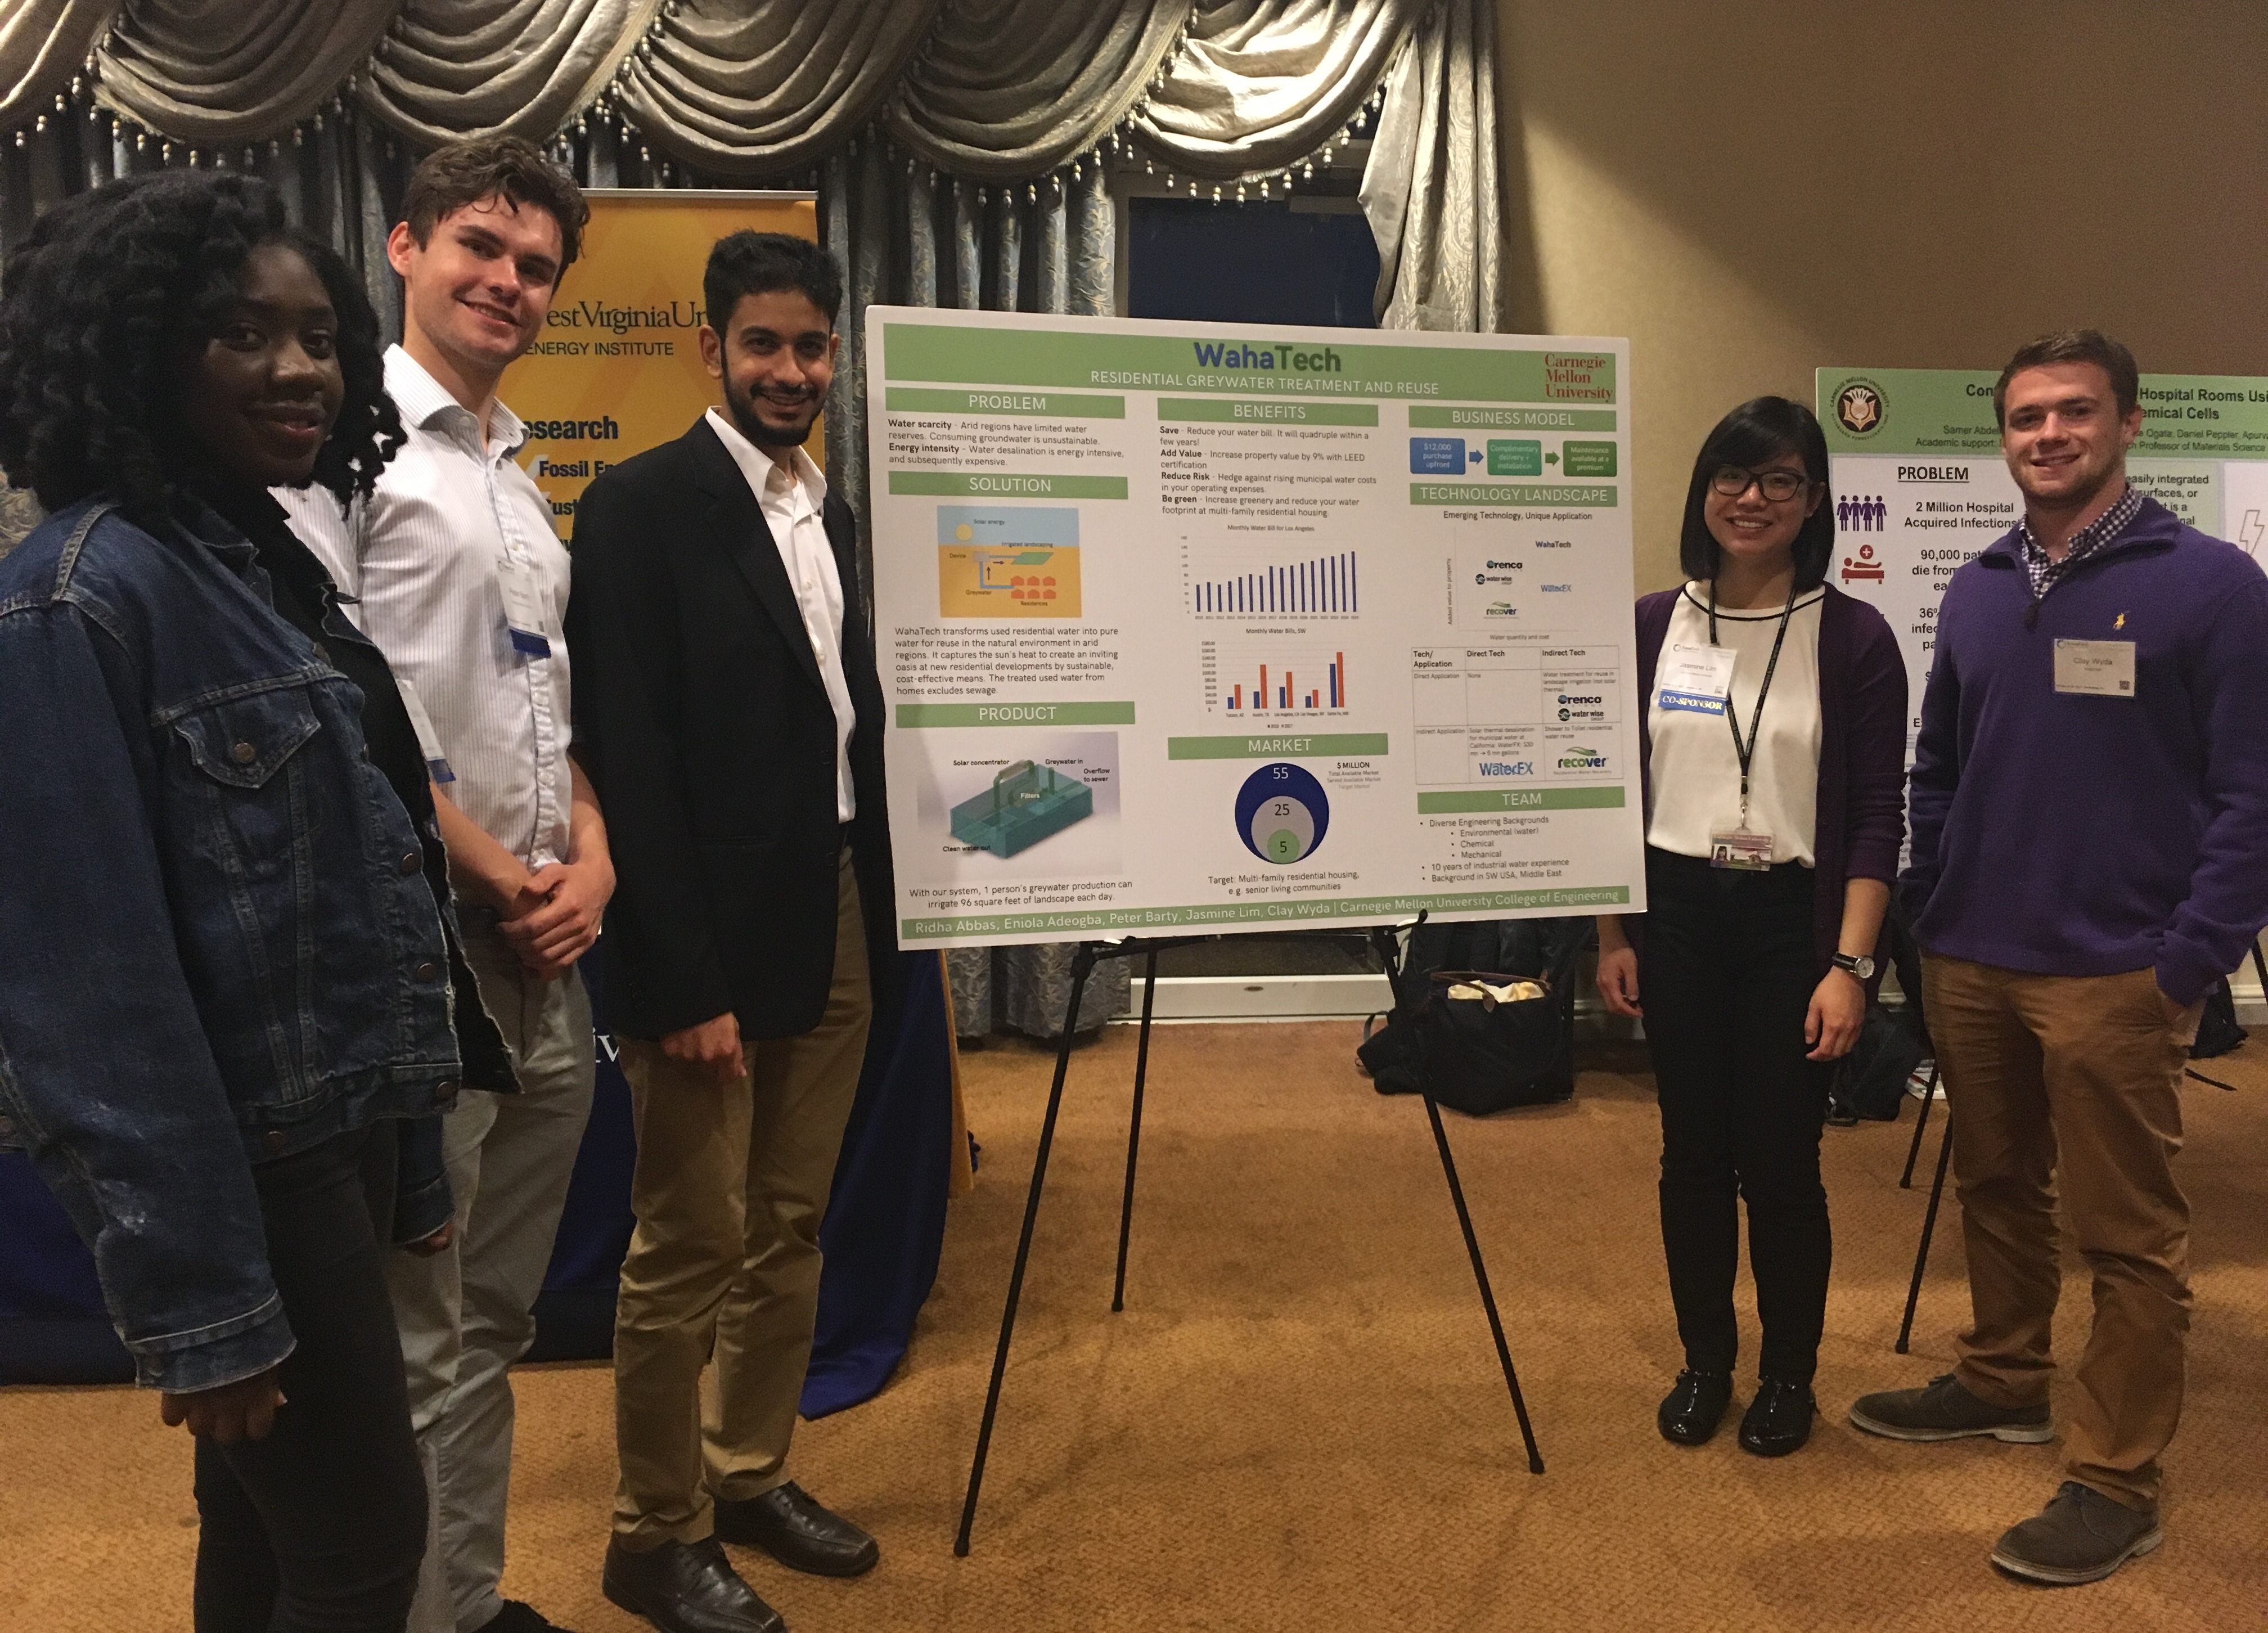 cmu researchers gain feedback from energy leaders on their posters.